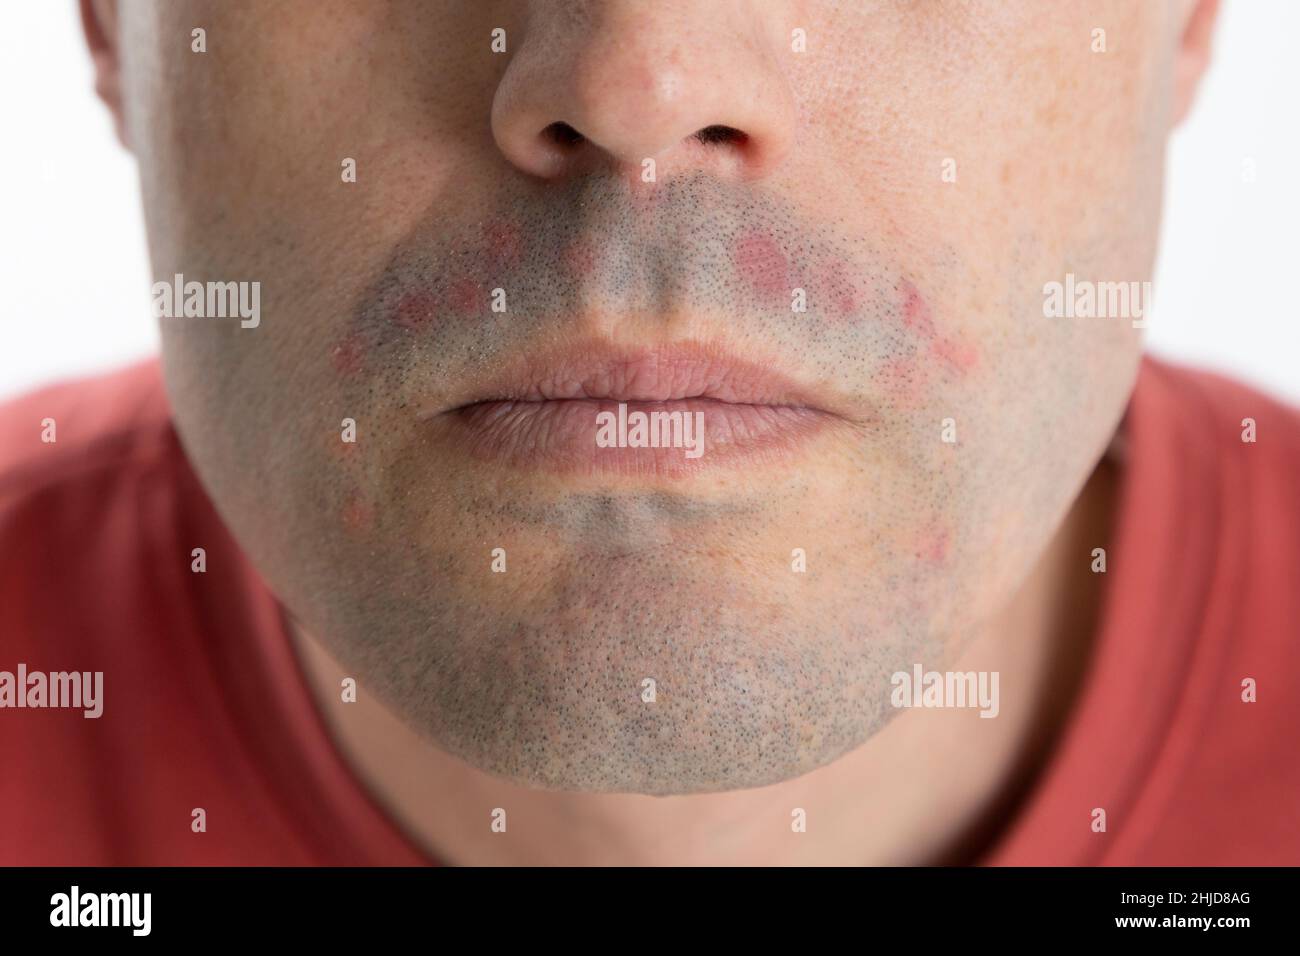 Chin Of A Man With Dermatitis After Shaving Male Skin Problems And